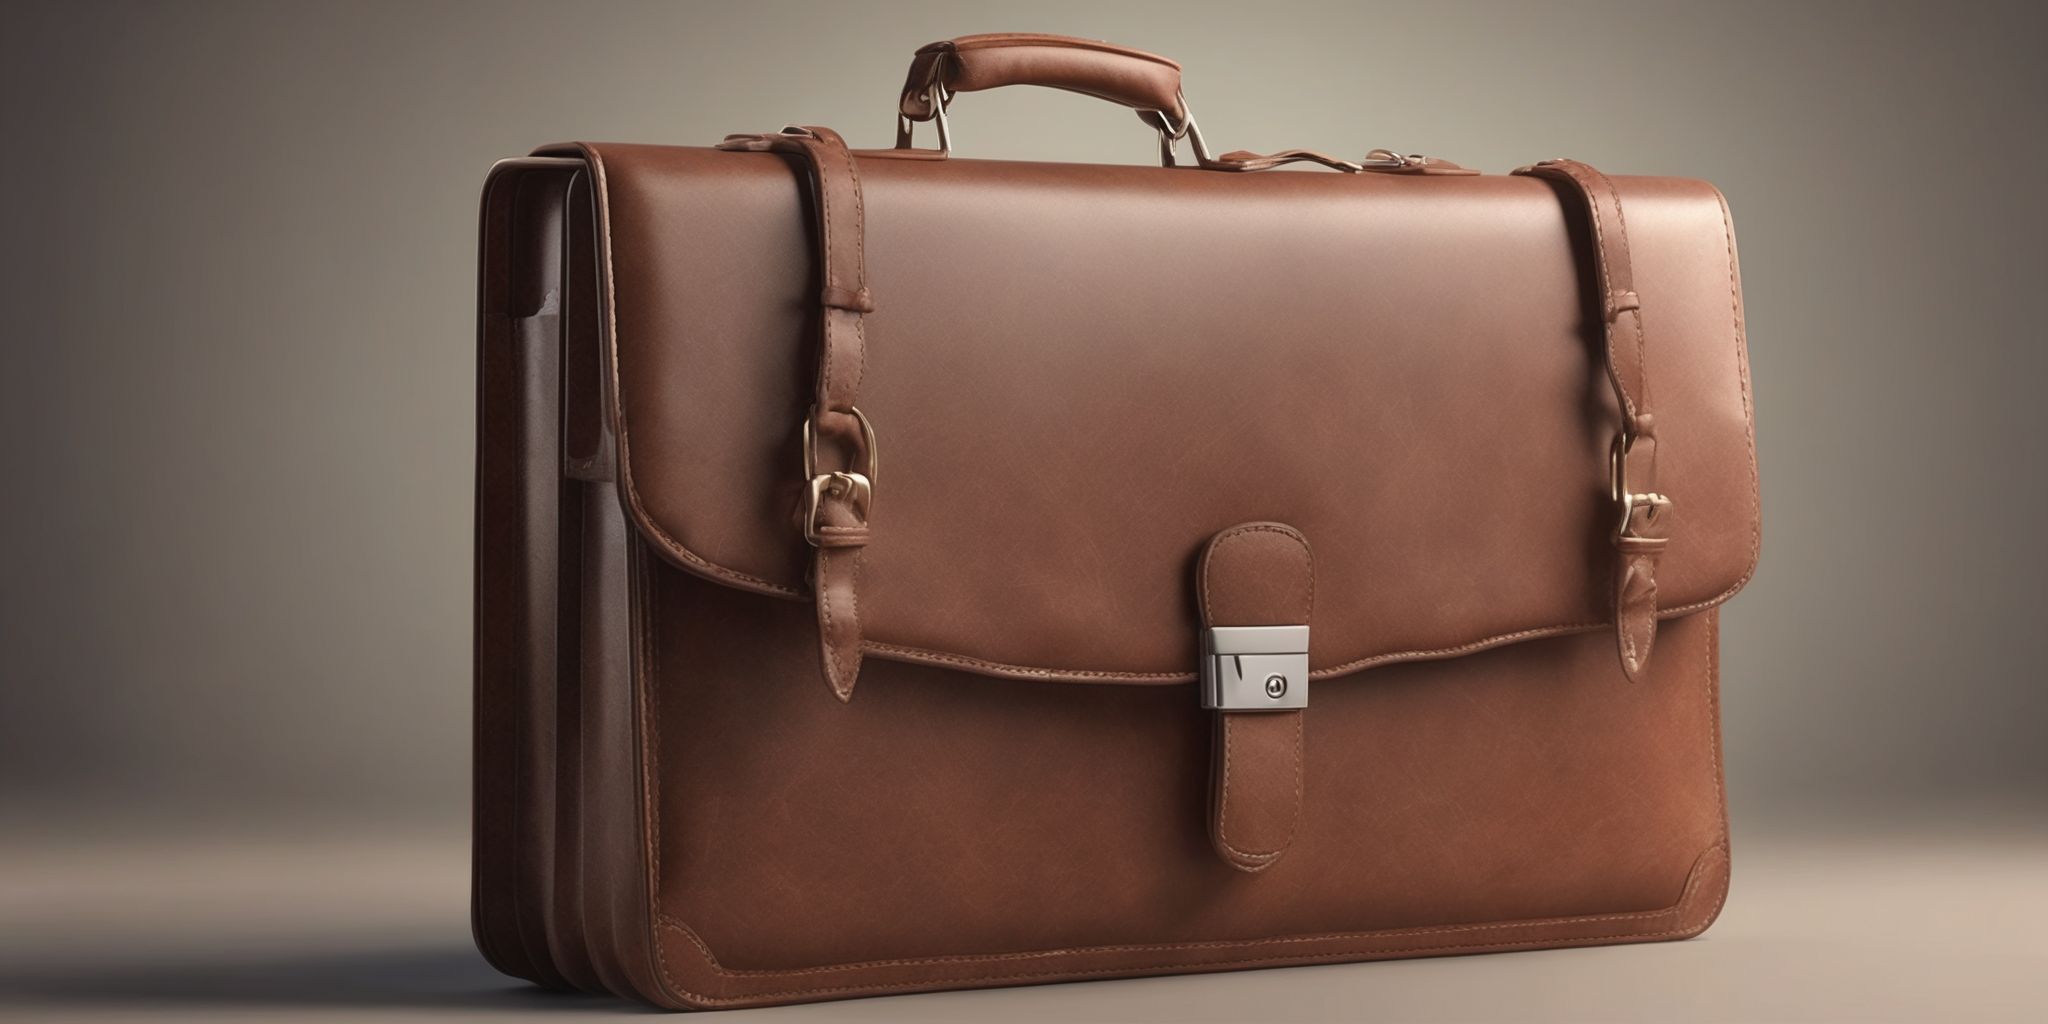 Briefcase  in realistic, photographic style